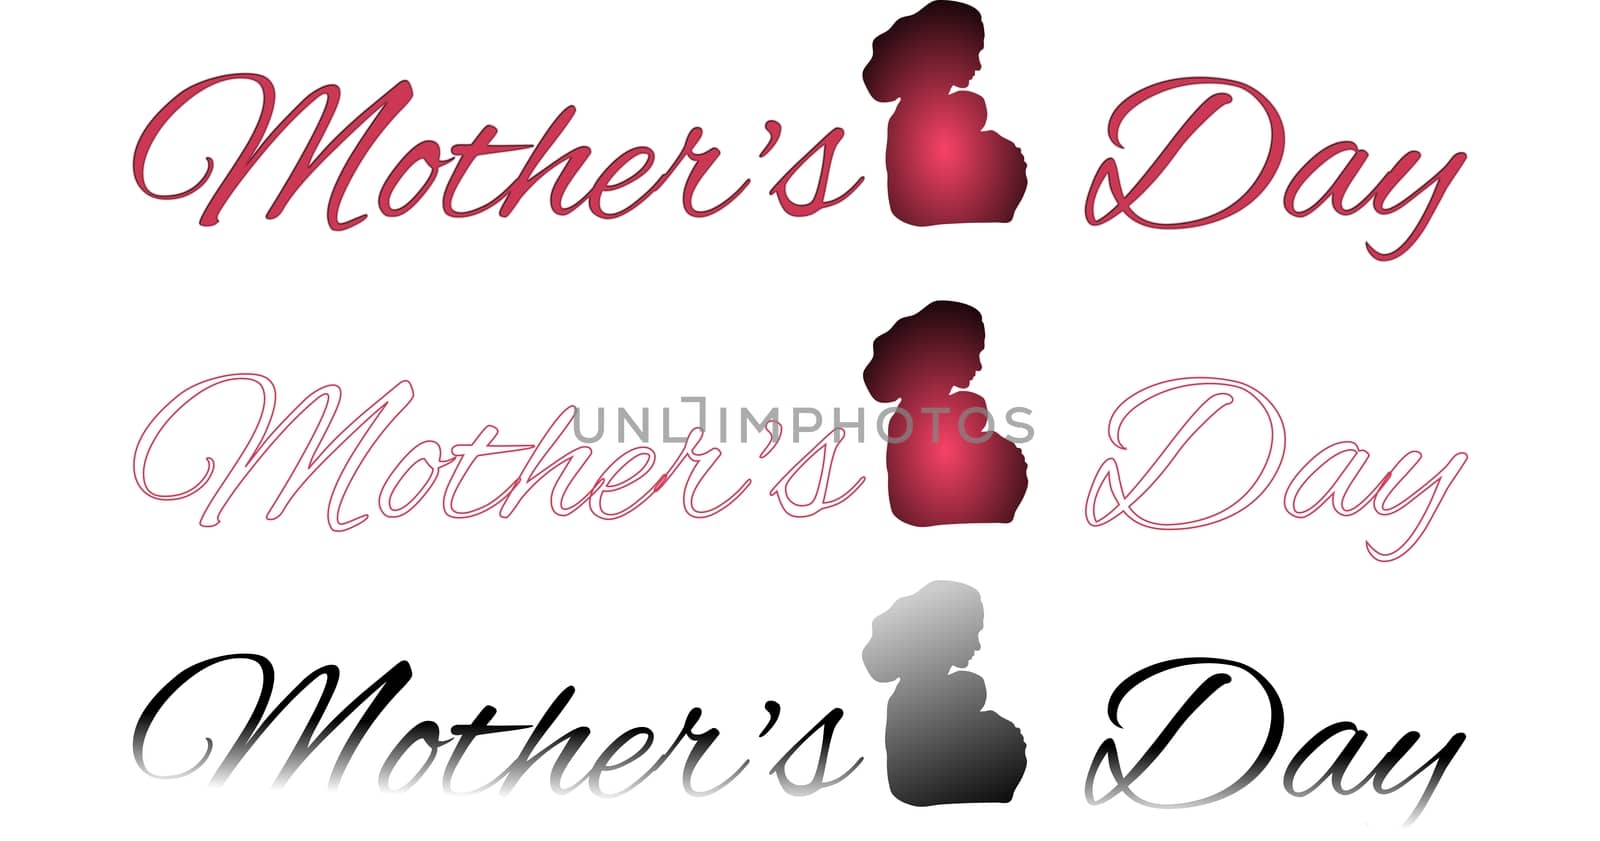 Set of inscriptions "Mother's day" with shadow of mother with baby isolated on a white background